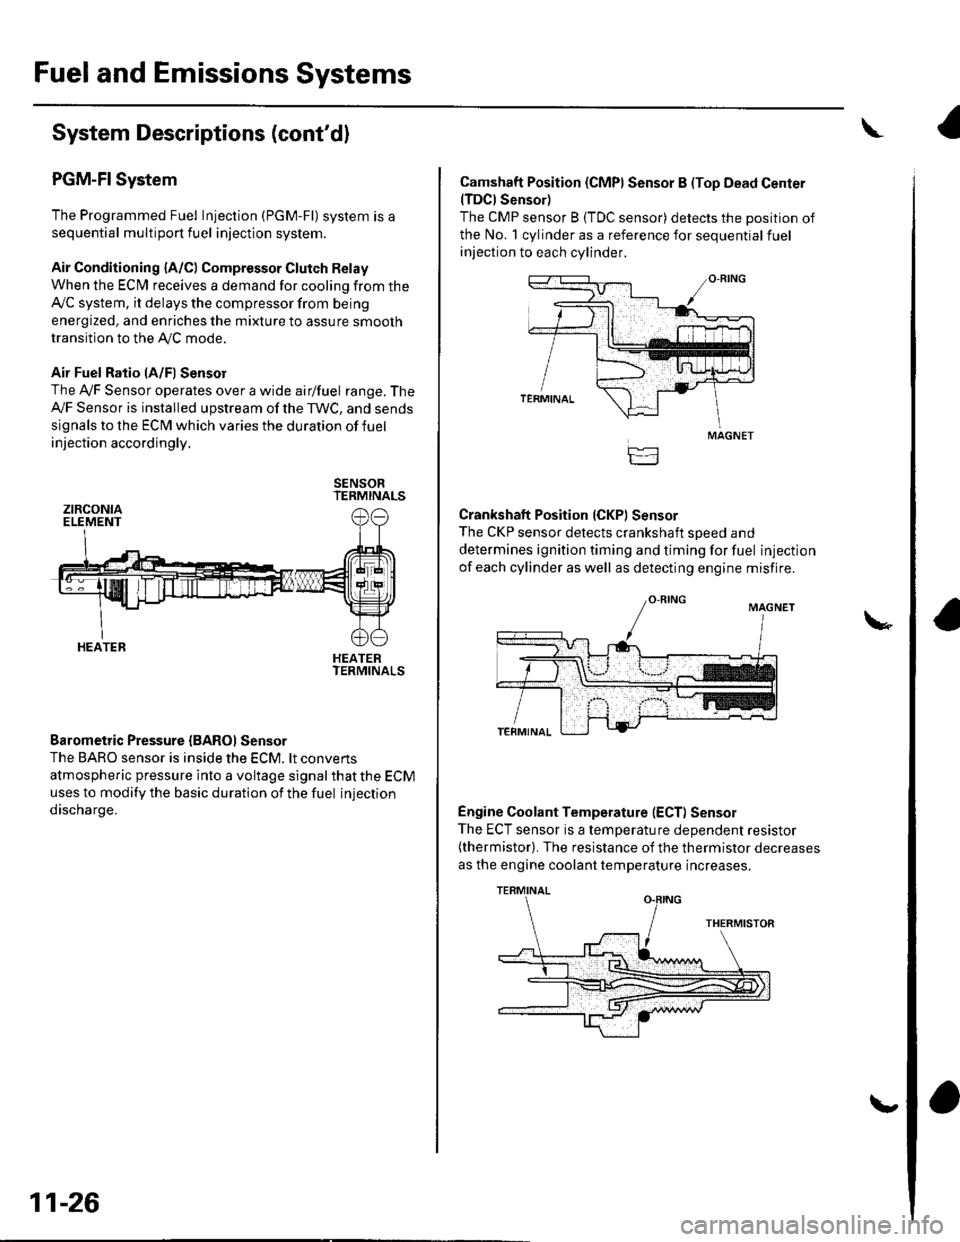 HONDA CIVIC 2002 7.G Workshop Manual Fuel and Emissions Systems
System Descriptions (contd)
PGM-FI System
The Programmed Fuel Injection (PGM-Fl) system is a
sequential multiport fuel injection system.
Air Conditioning {A/C) Compressor G